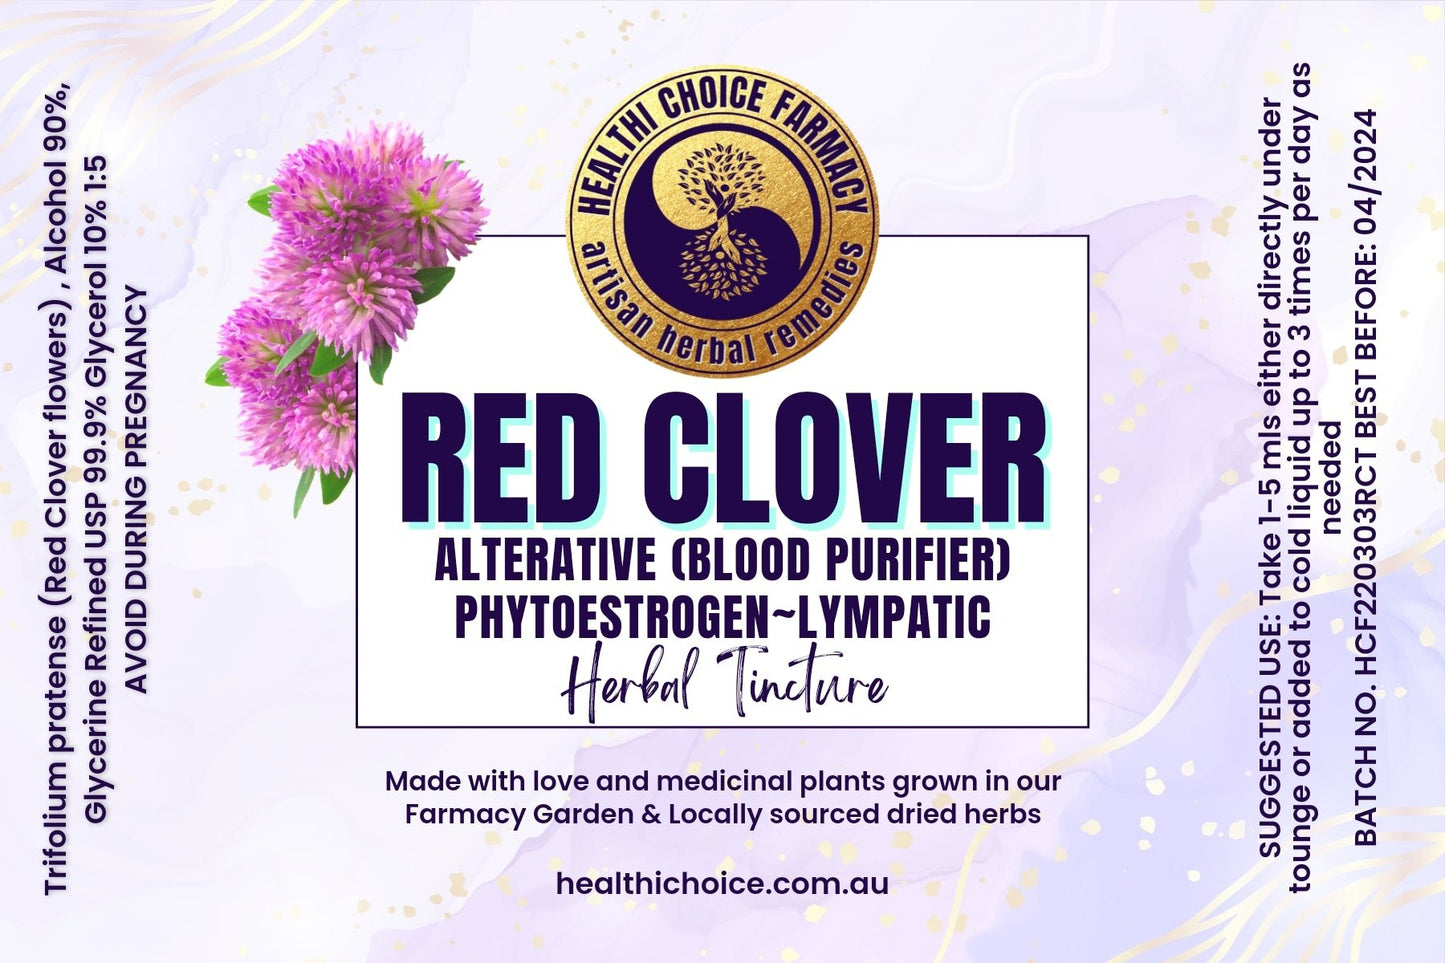 Red clover (Trifolium pratense) Liquid extract Herbal Tincture natural herbal supplement - Healthi Choice Farmacy